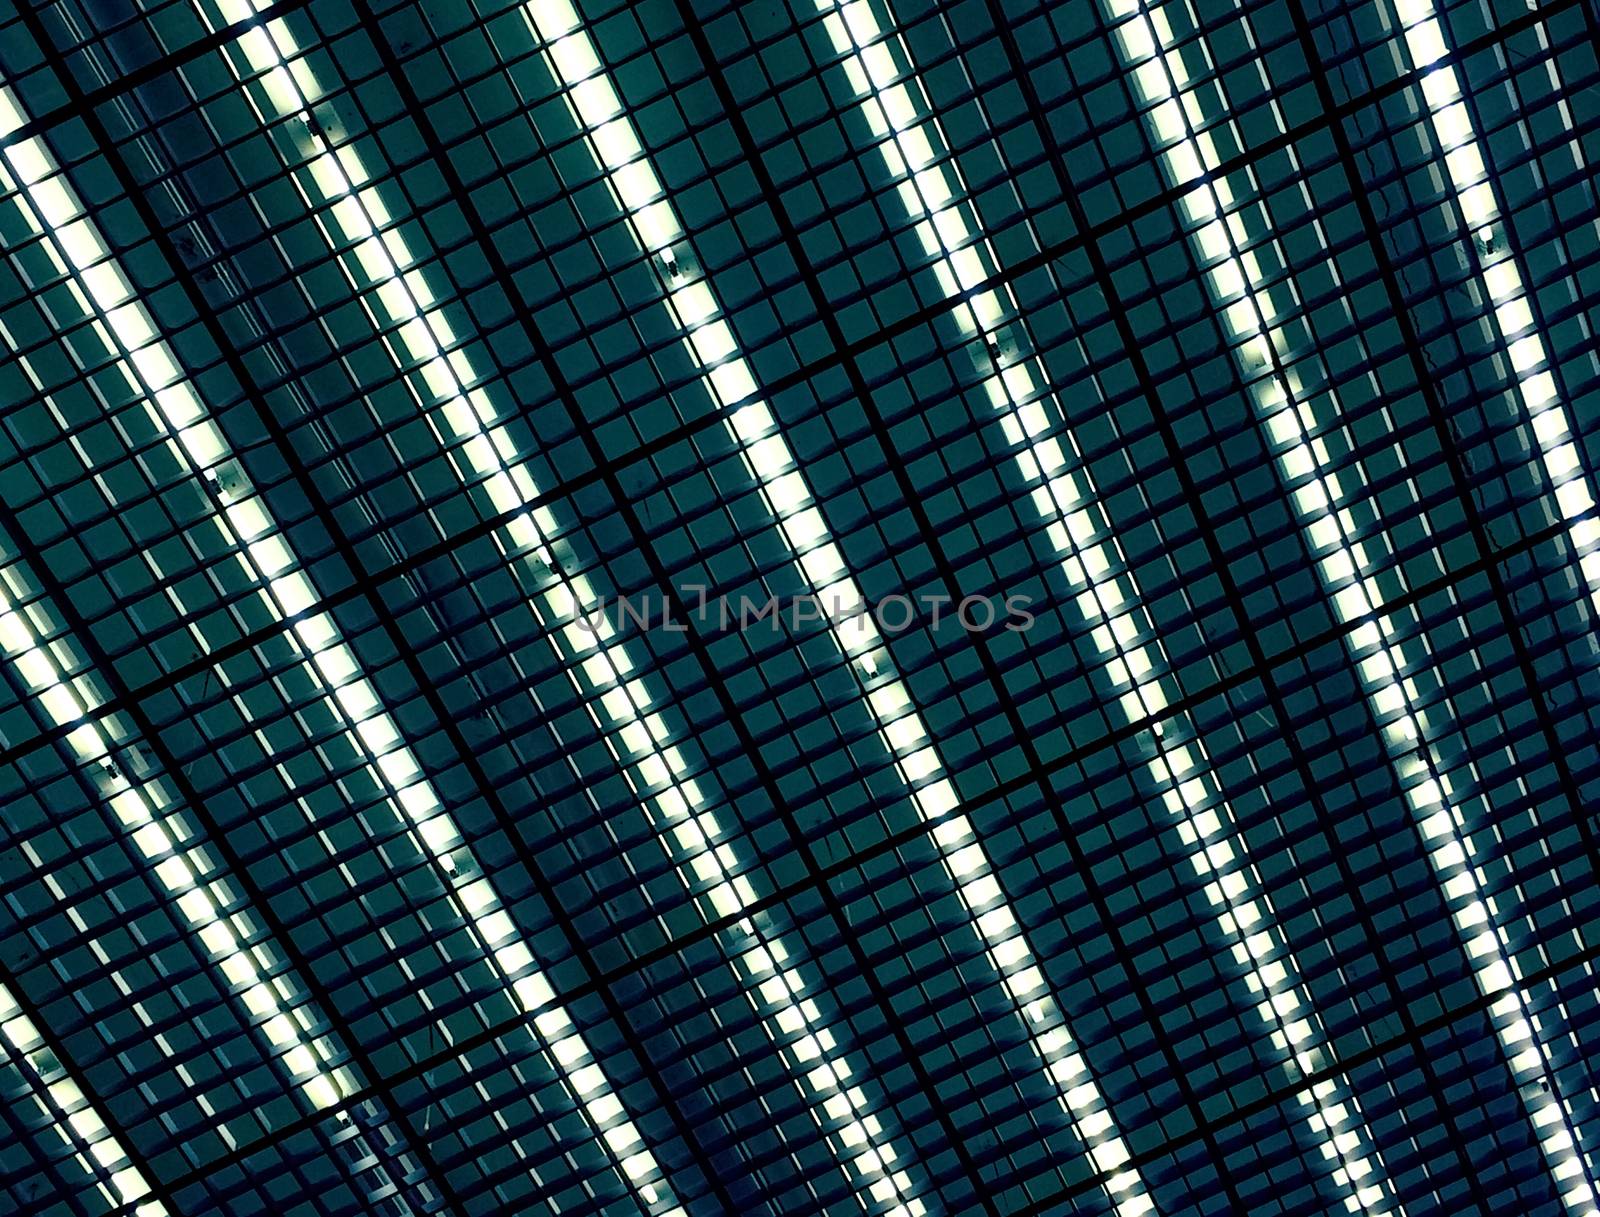 Neon lights on the ceiling of an industrial building.